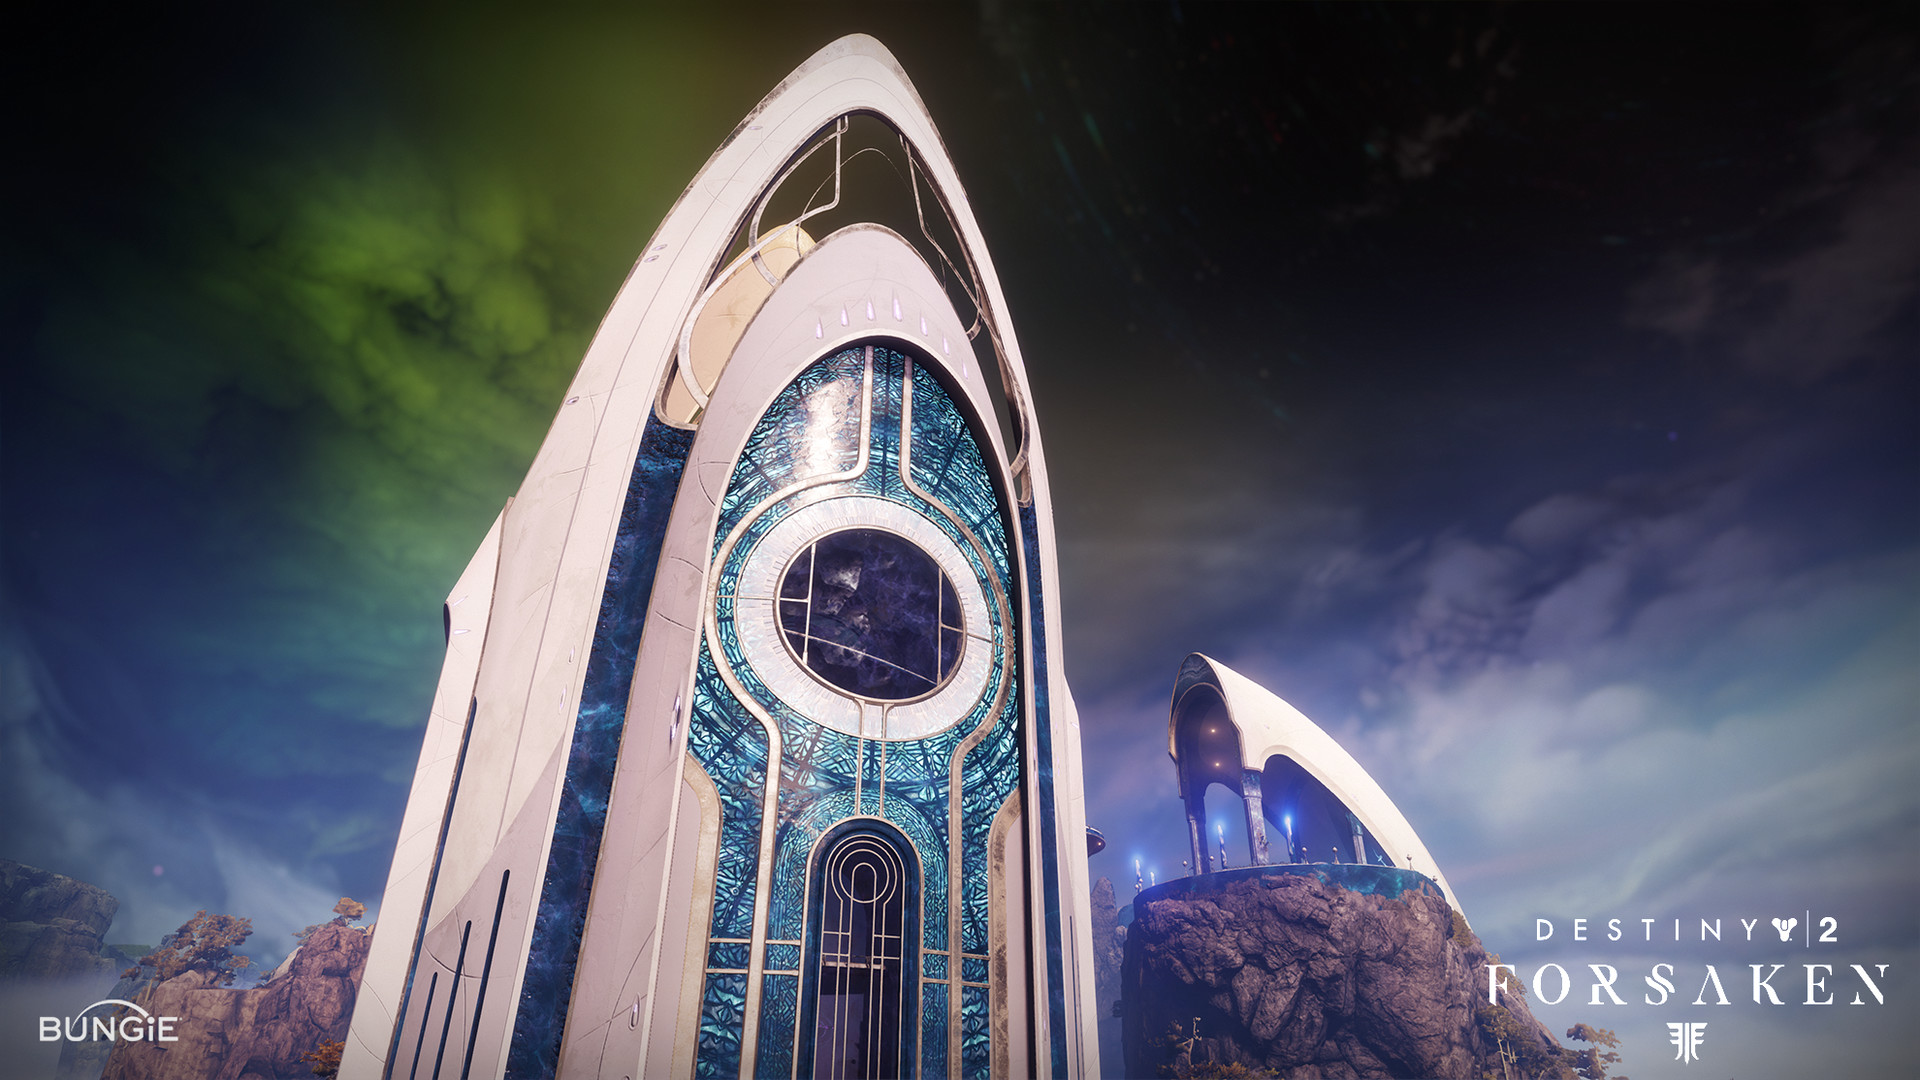 Dreaming City Towers